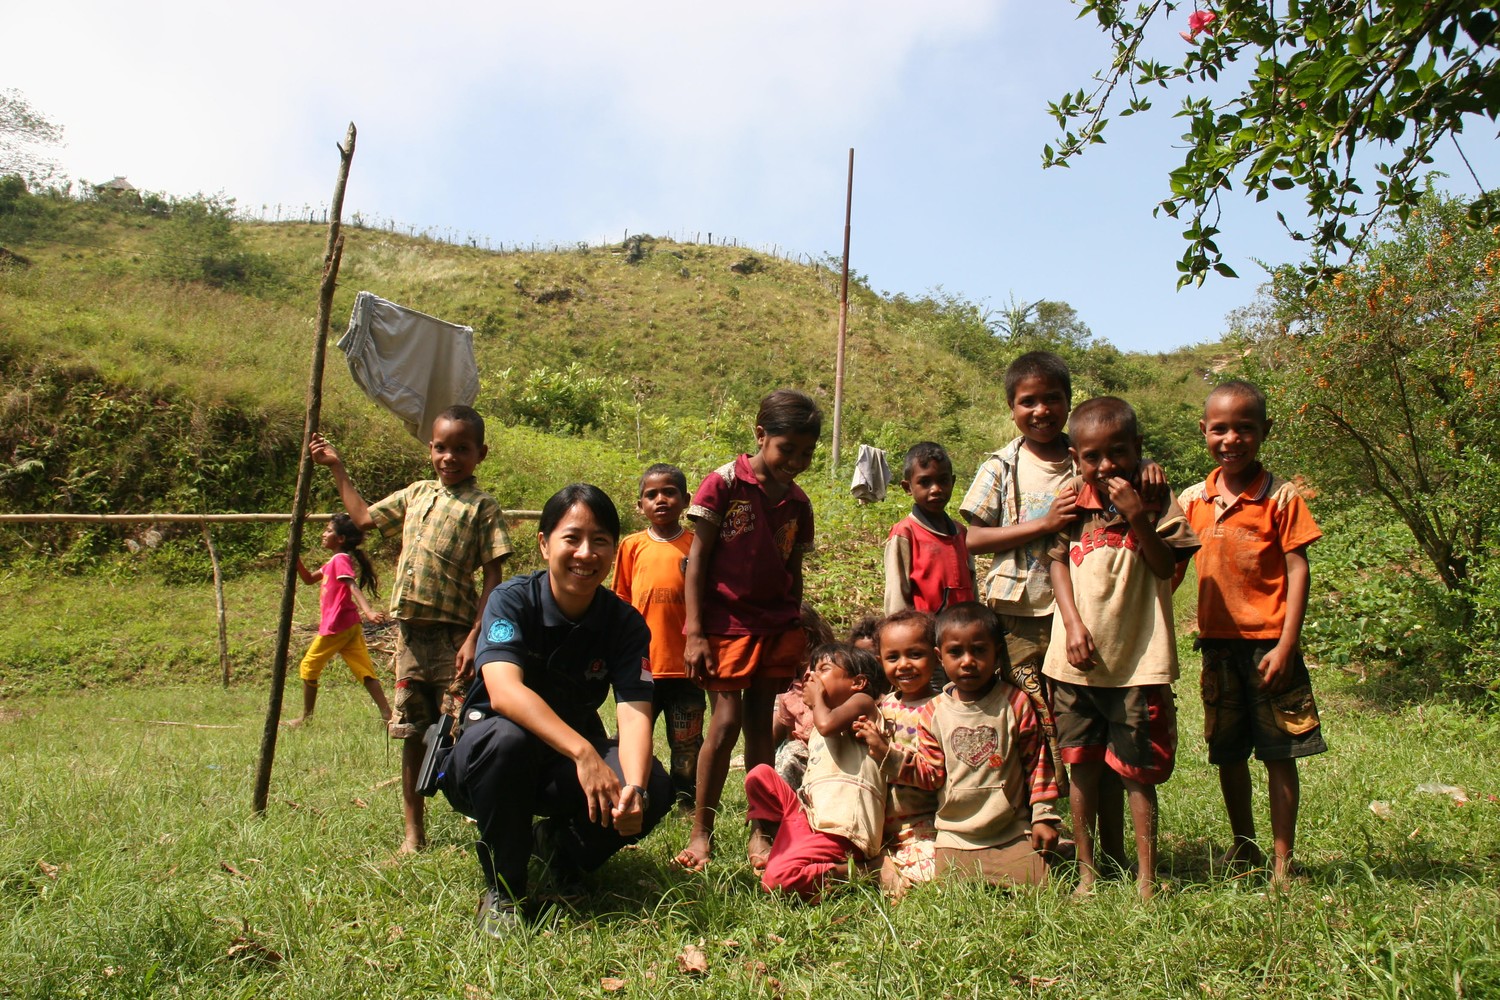 Supt Toh in a crouched position, posing for a camera on a green field, with a few children beside her. On the right is a tree providing shade and in the background is a big green mountain